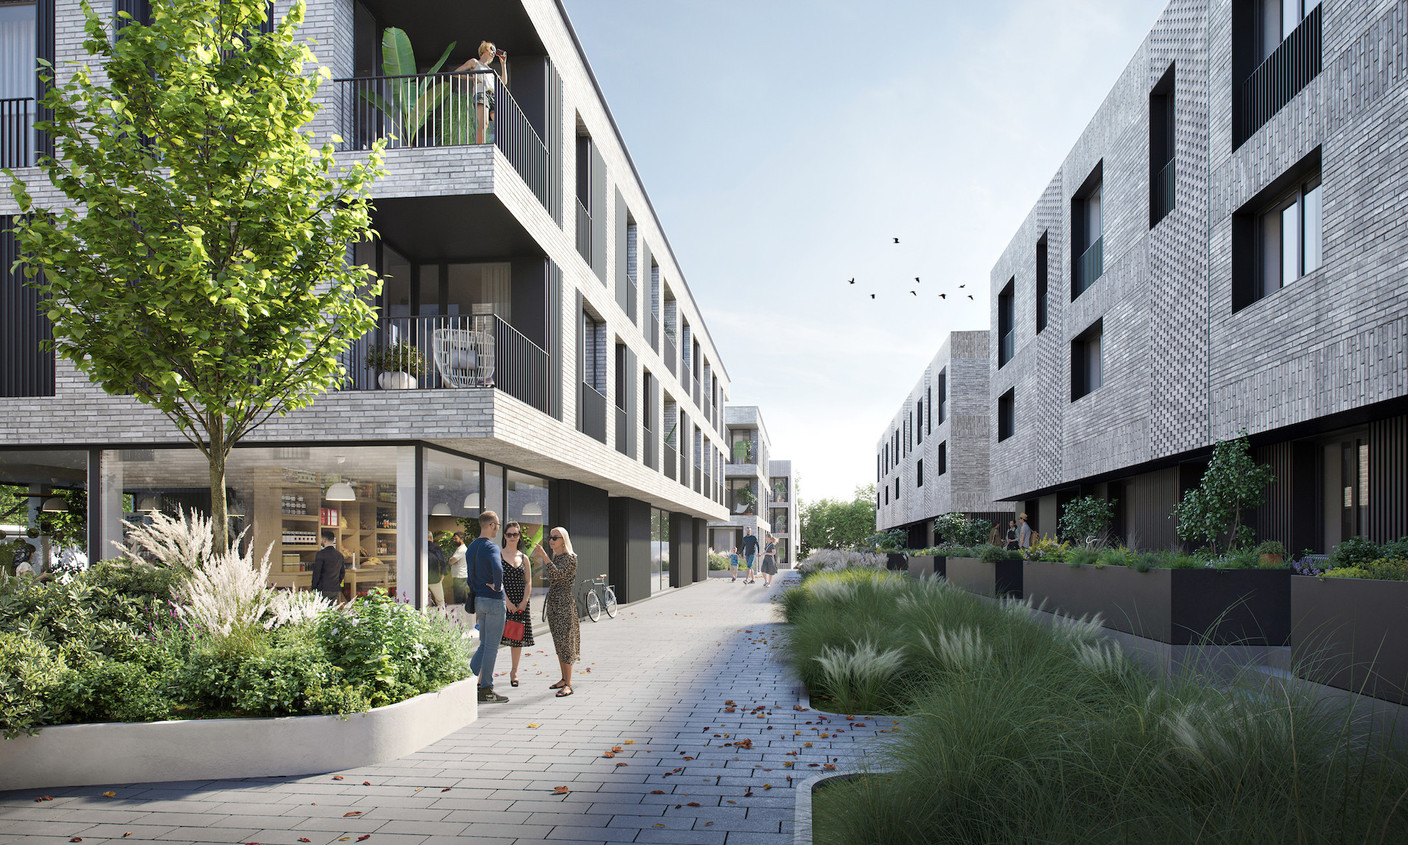 Within the buildings, there will be residential units, but also shops and offices. (Illustration: Metaform architects)